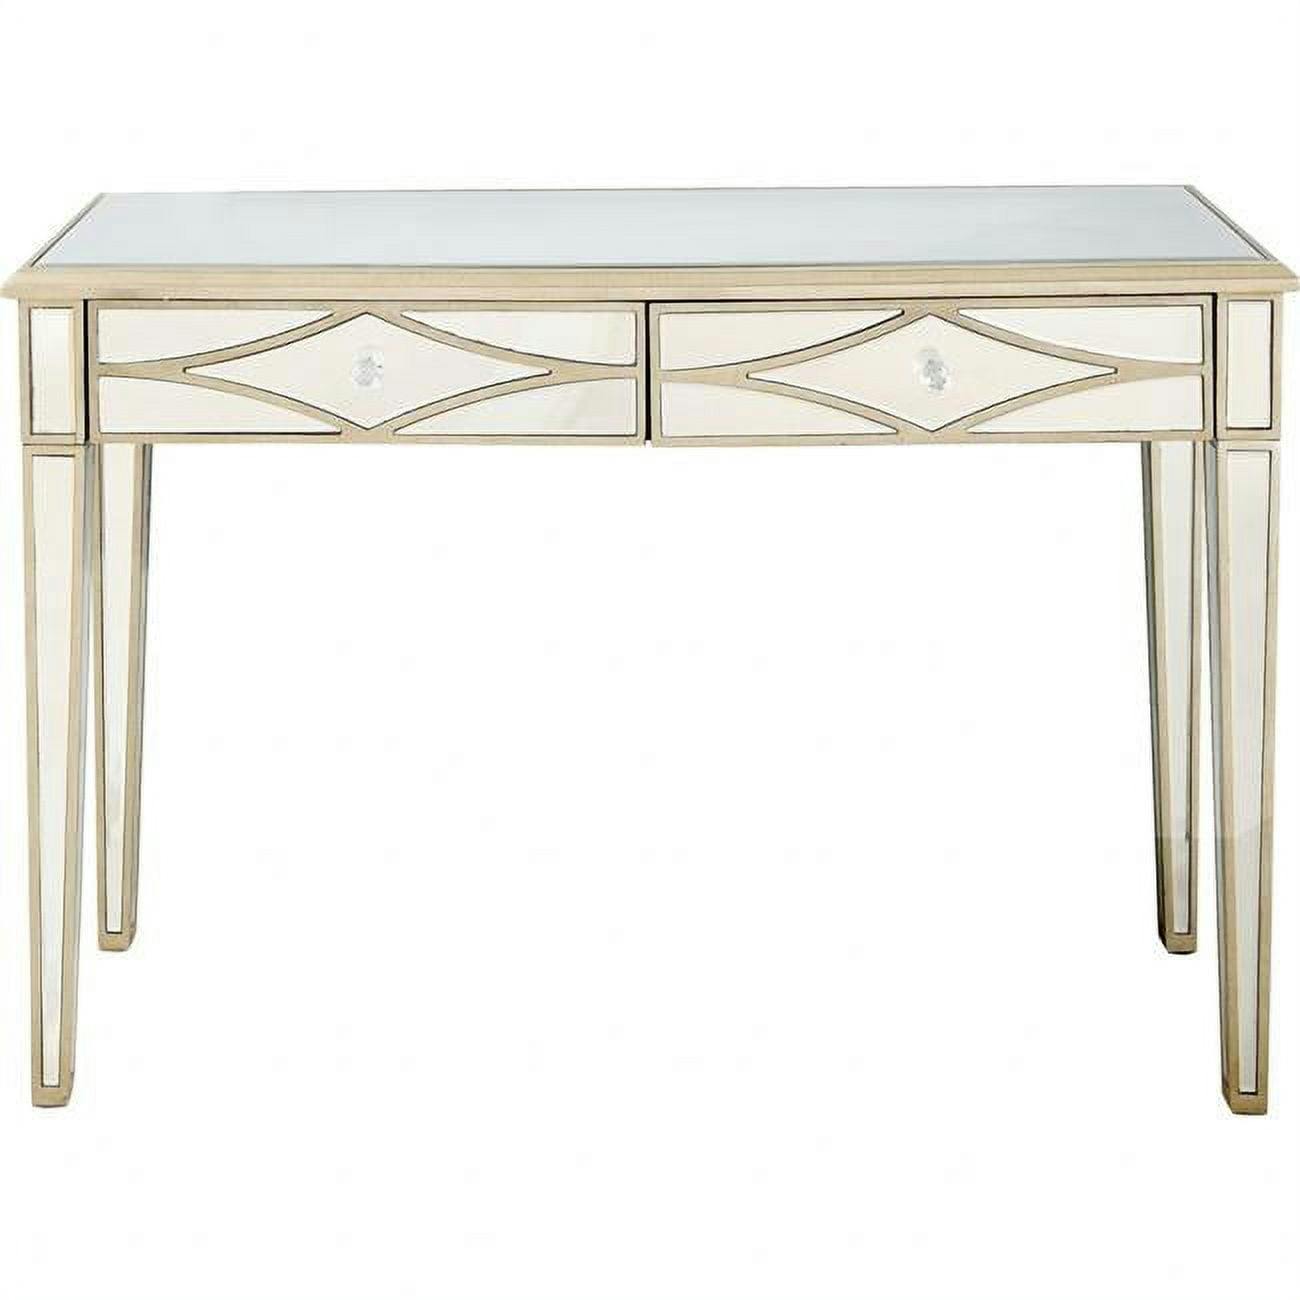 Champagne Beveled Glass Console Table with Crystal Knobs